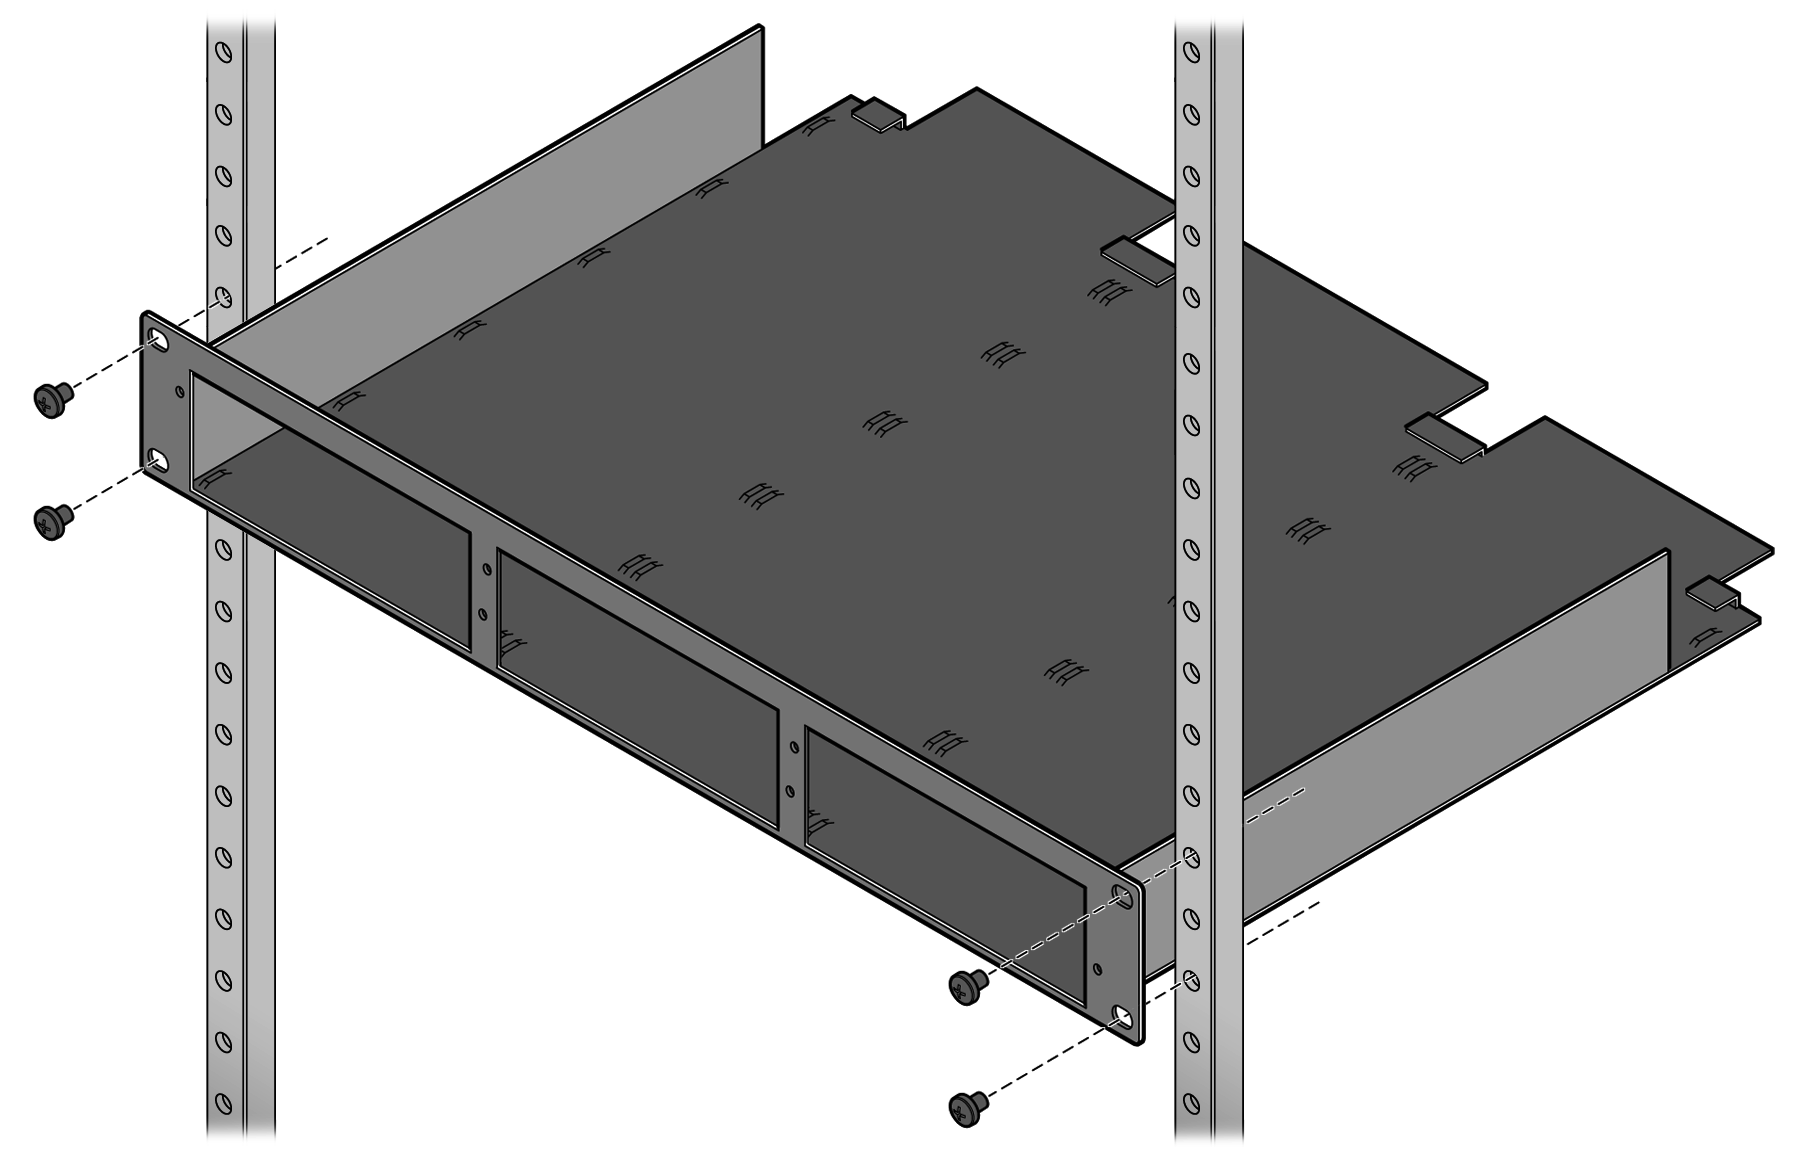 Securing the three-slot shelf to a rack, by inserting screws through the flanges on both ends of the shelf into the left and rack posts